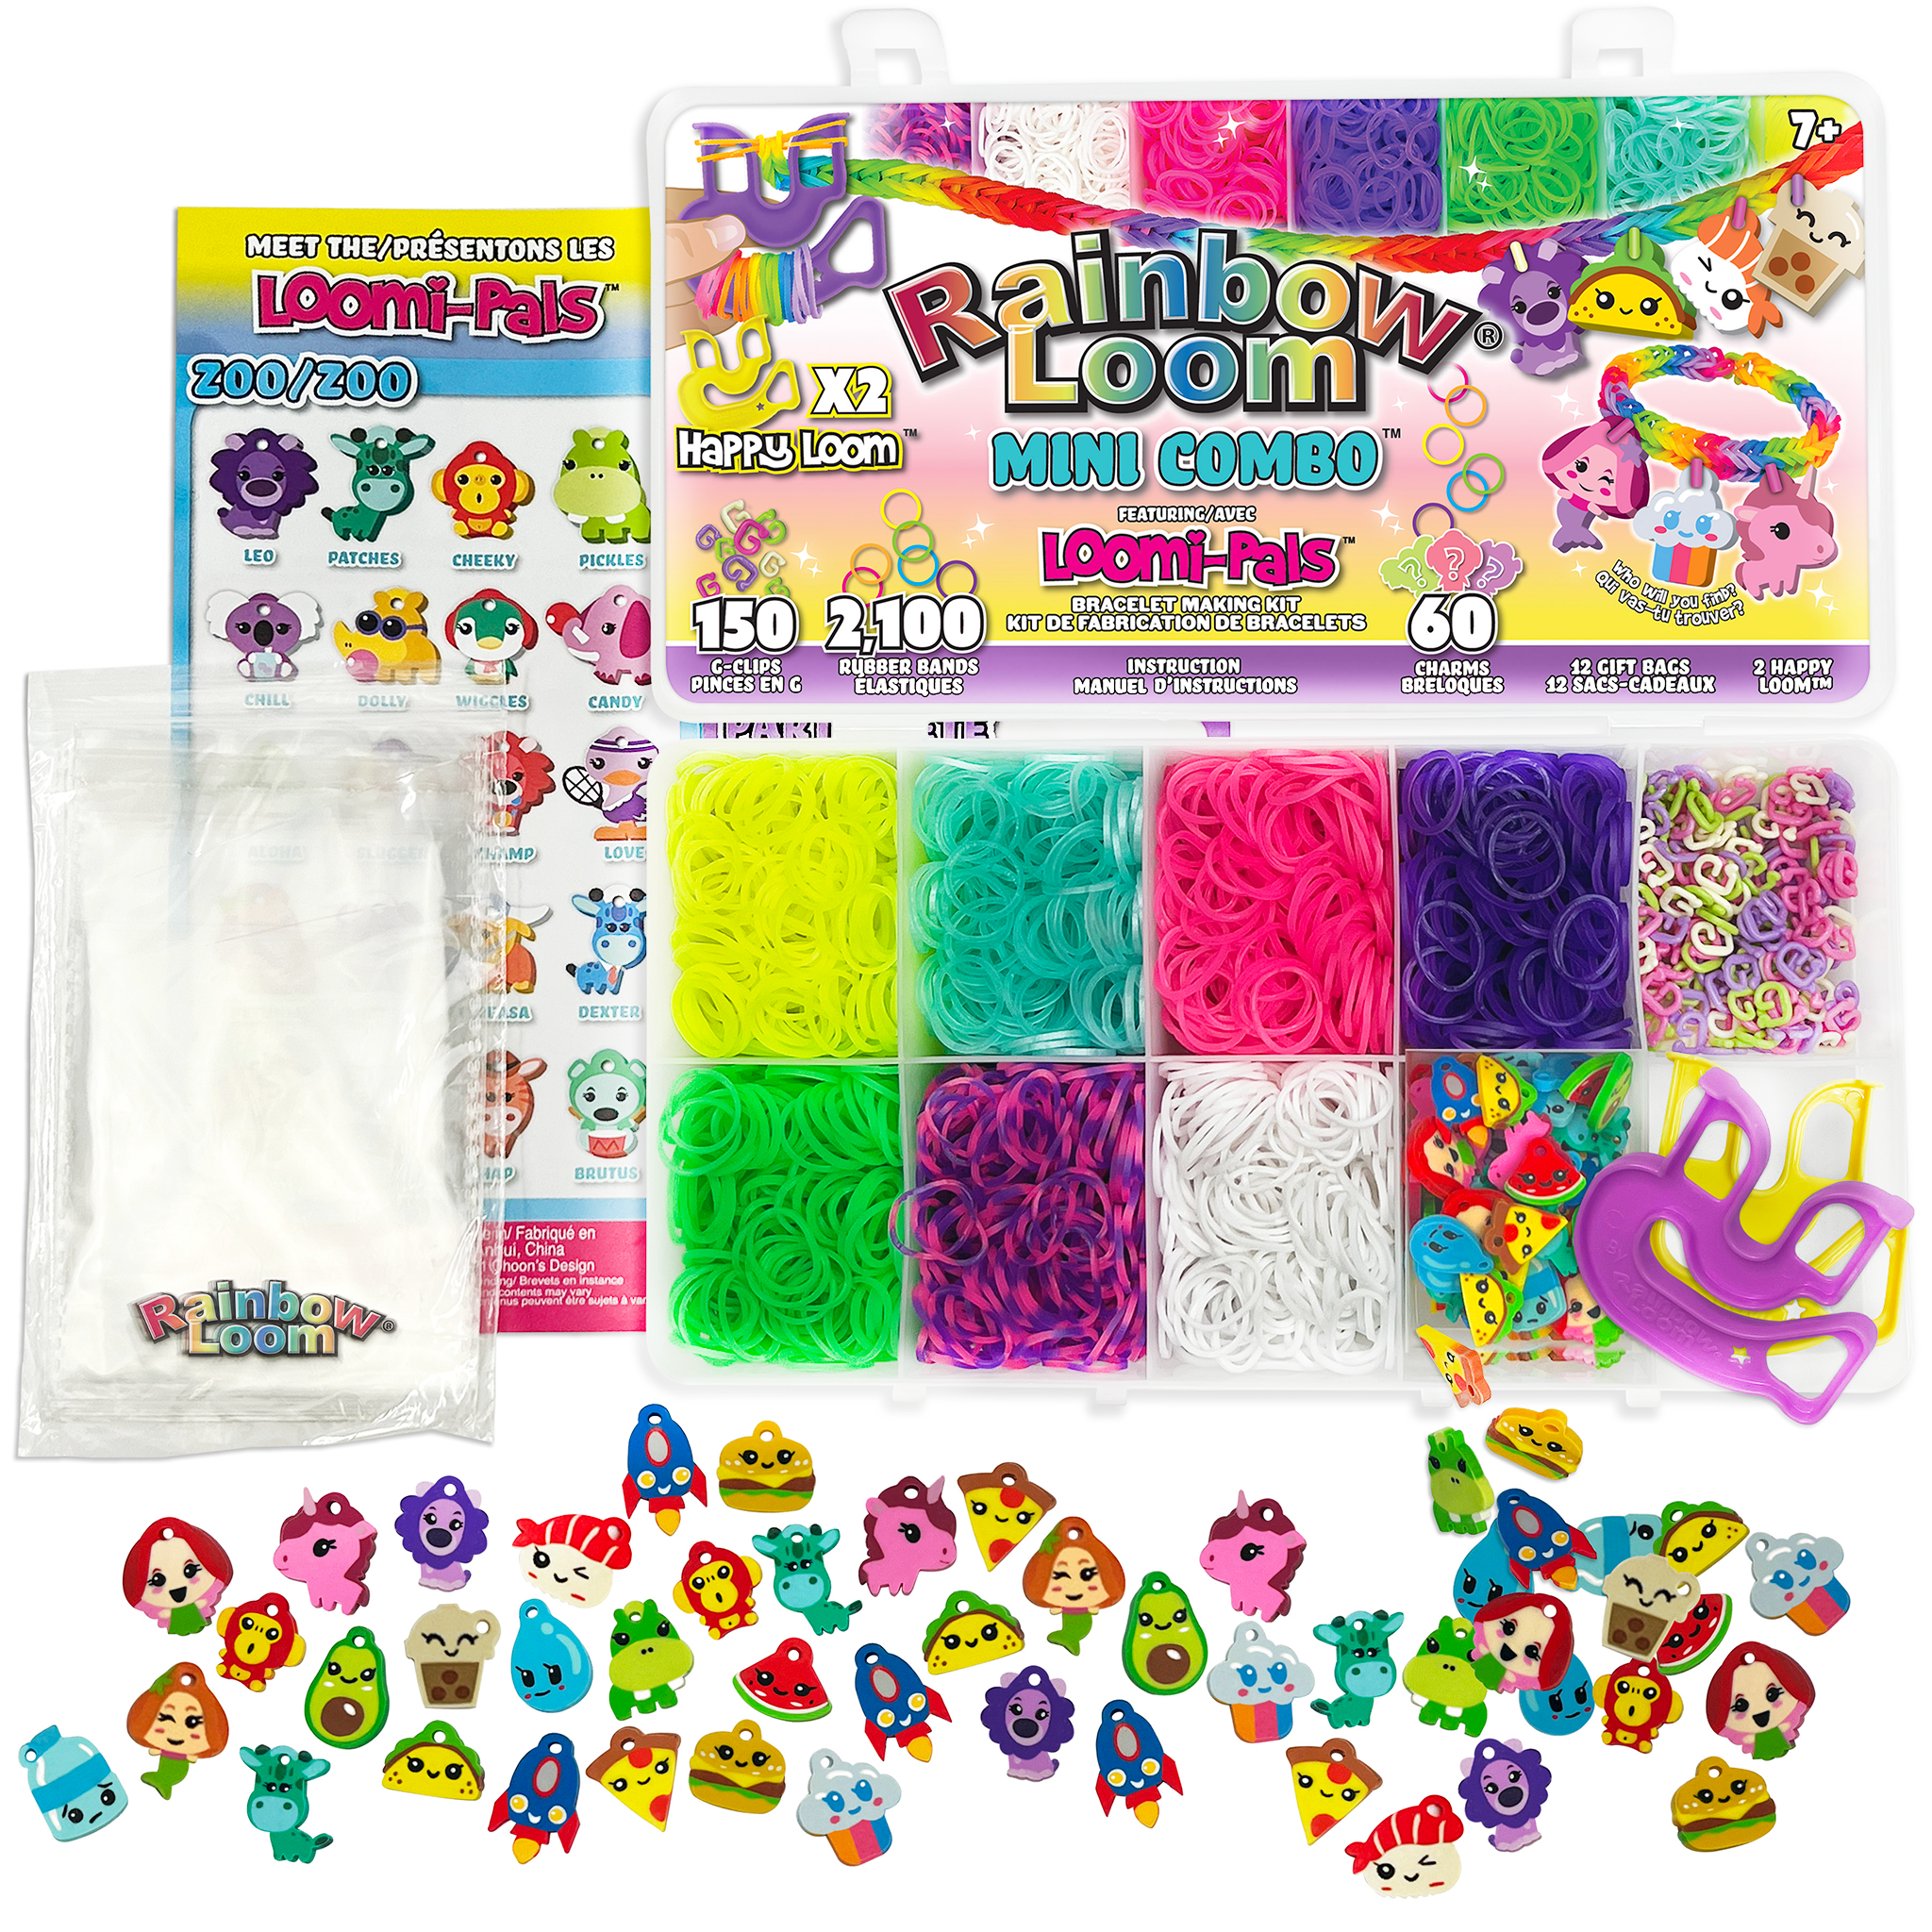 The Rainbow Loom Charms & Bracelets Have Taken Over!